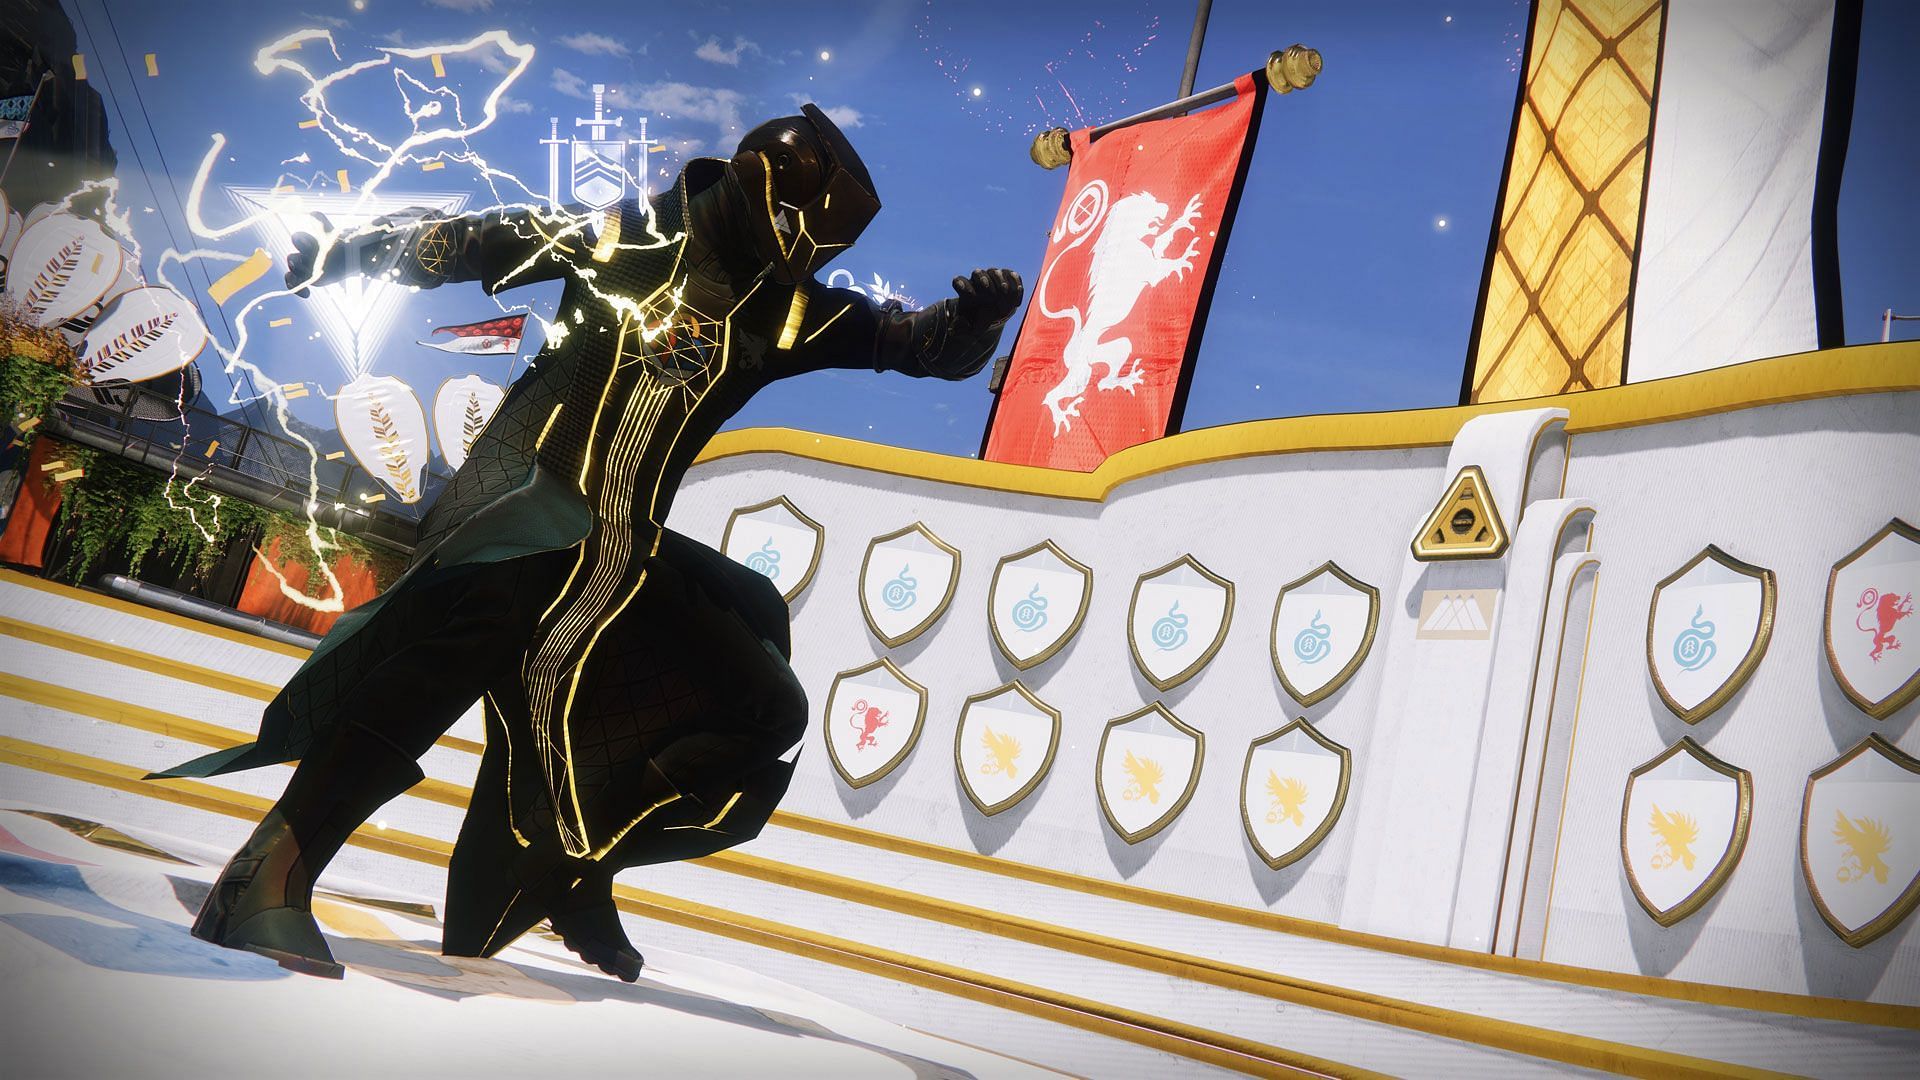 Depositing medals on the podium of Guardian Games (Image via Bungie)